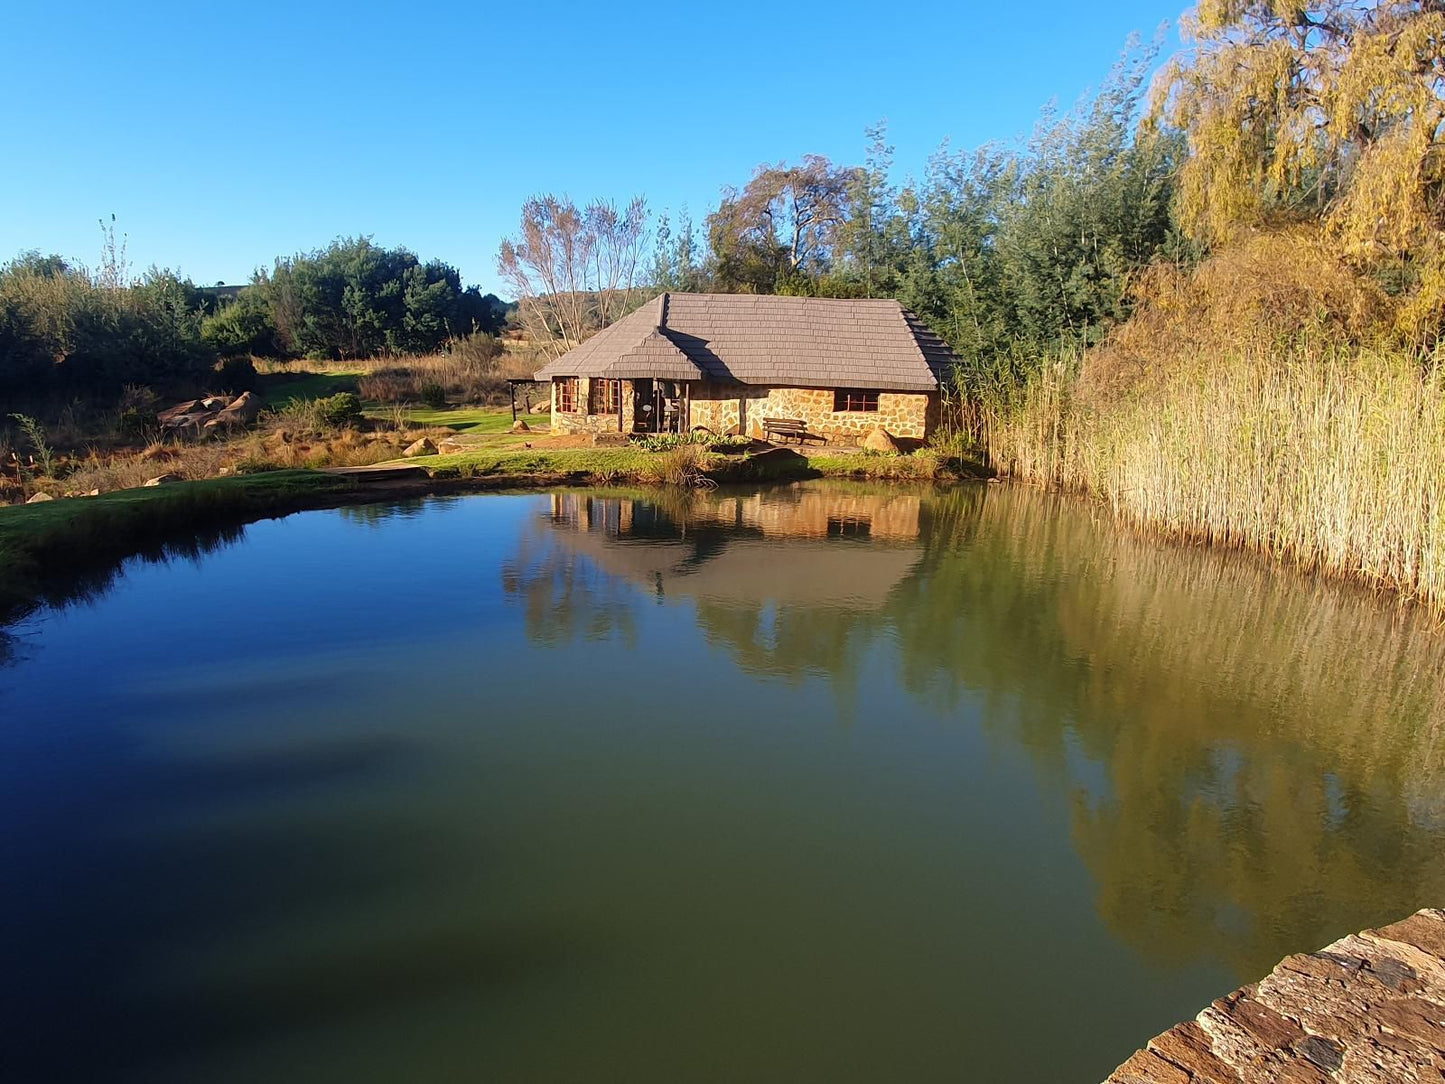 Riverman Cabin Dullstroom Mpumalanga South Africa Complementary Colors, River, Nature, Waters